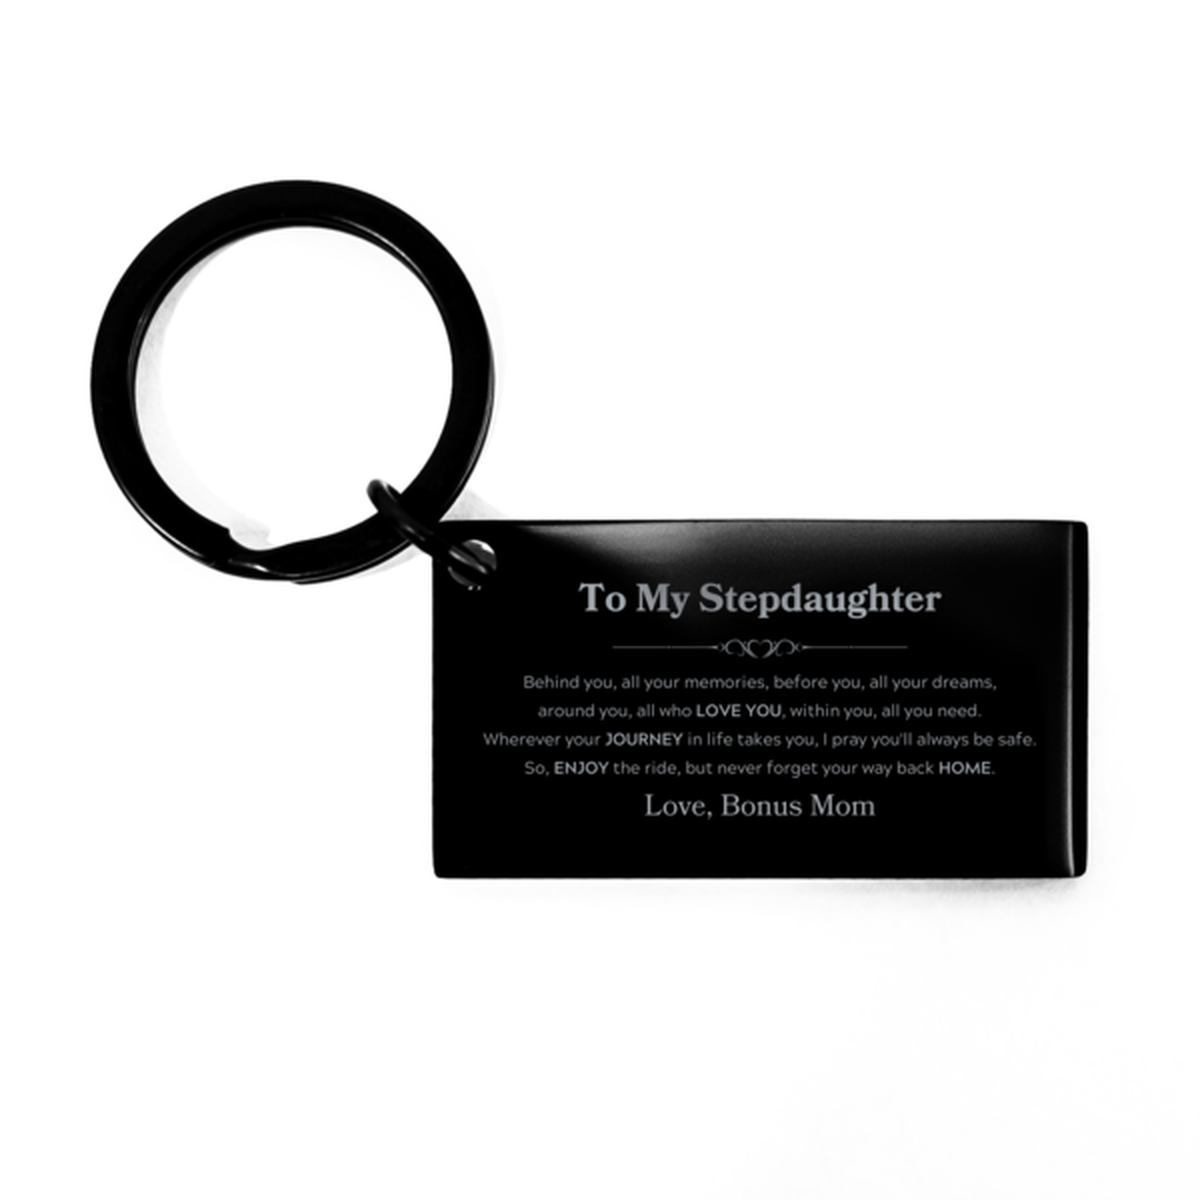 To My Stepdaughter Graduation Gifts from Bonus Mom, Stepdaughter Keychain Christmas Birthday Gifts for Stepdaughter Behind you, all your memories, before you, all your dreams. Love, Bonus Mom